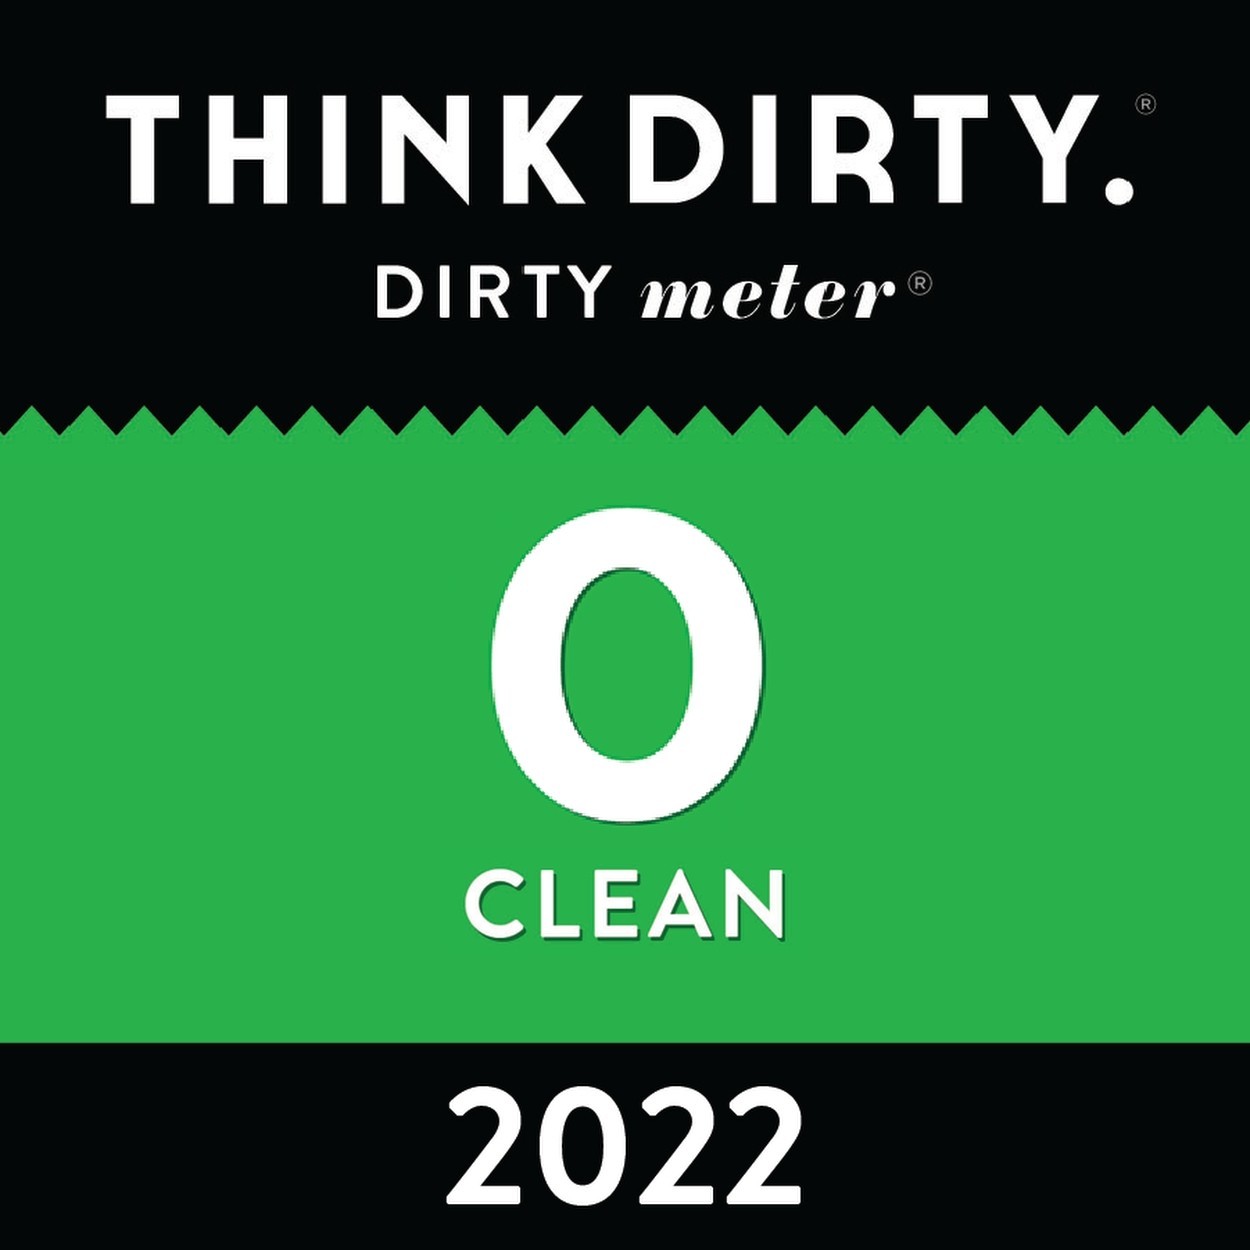 Rated Clean in the Think Dirty app